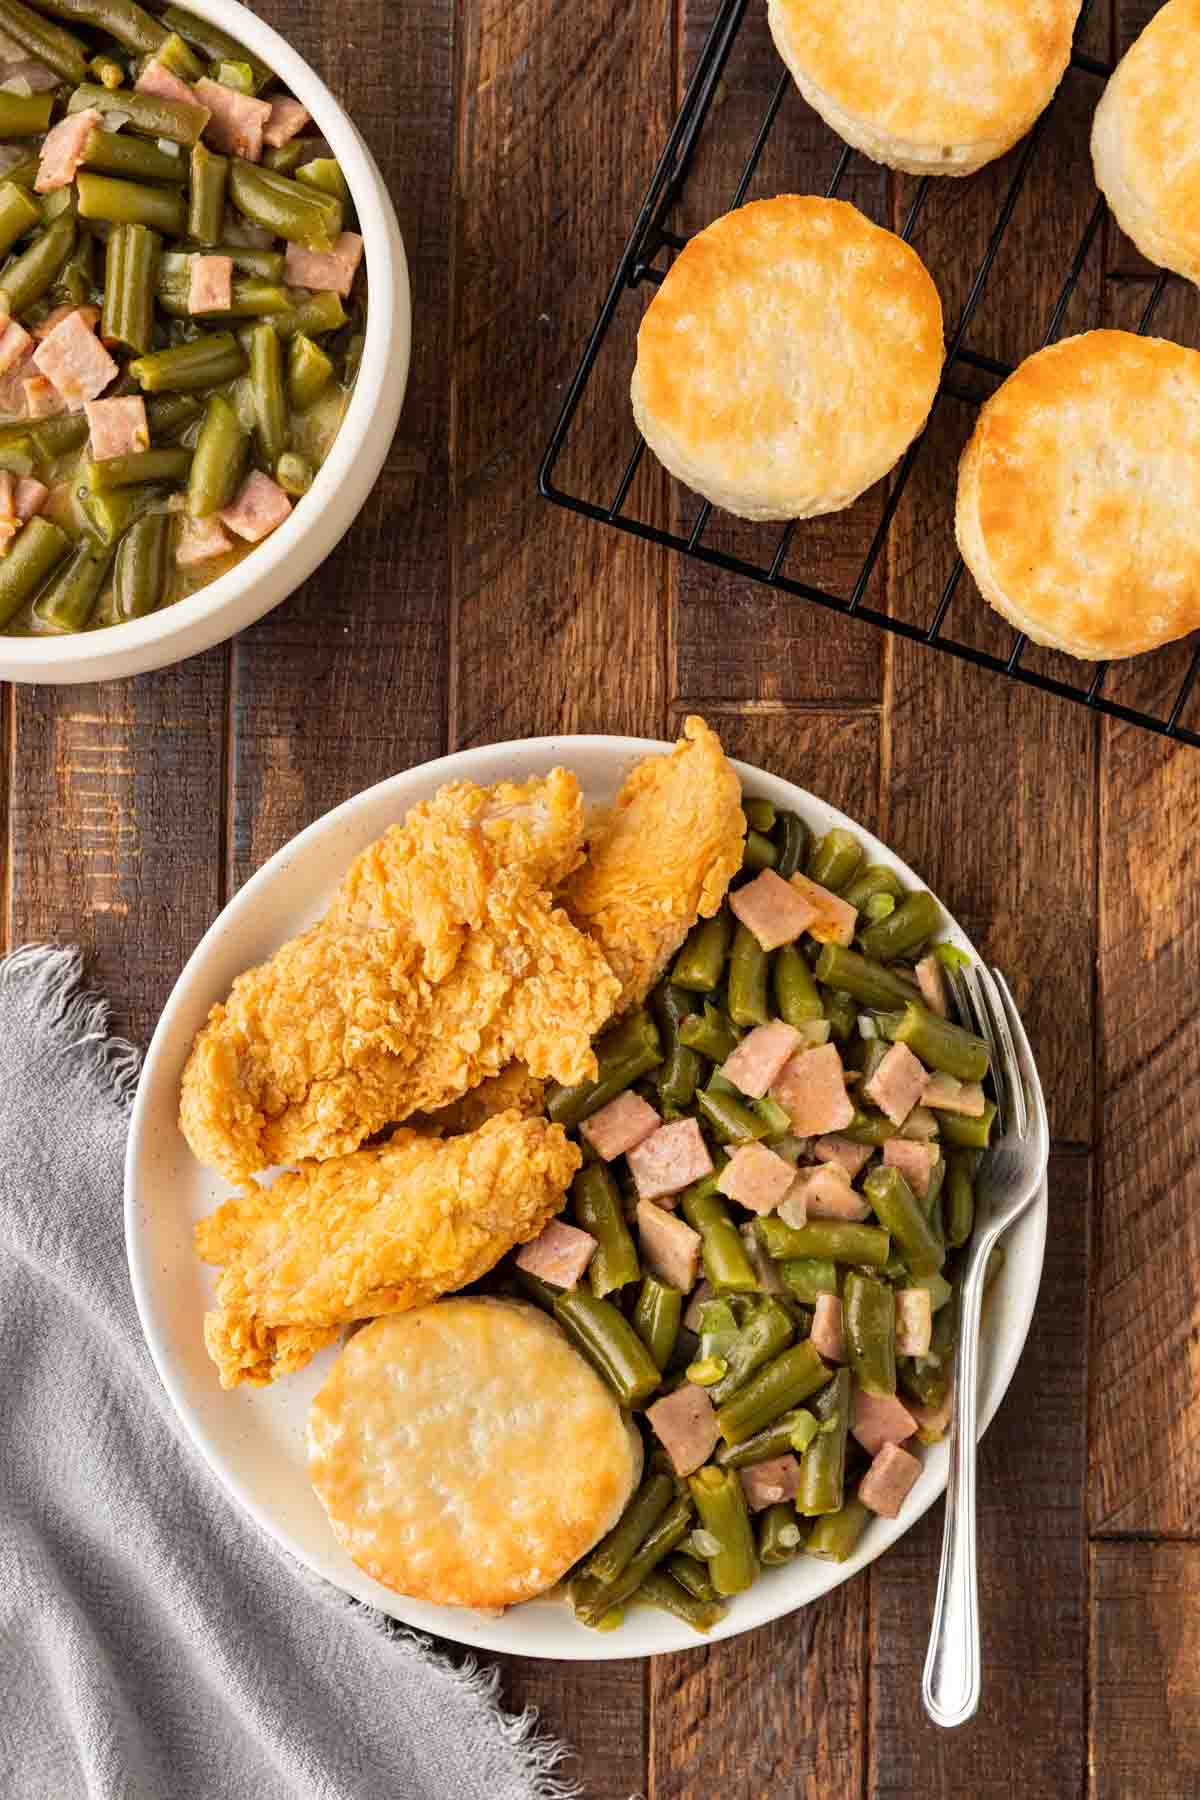 Popeye's Green Beans on plate with fried chicken and biscuit